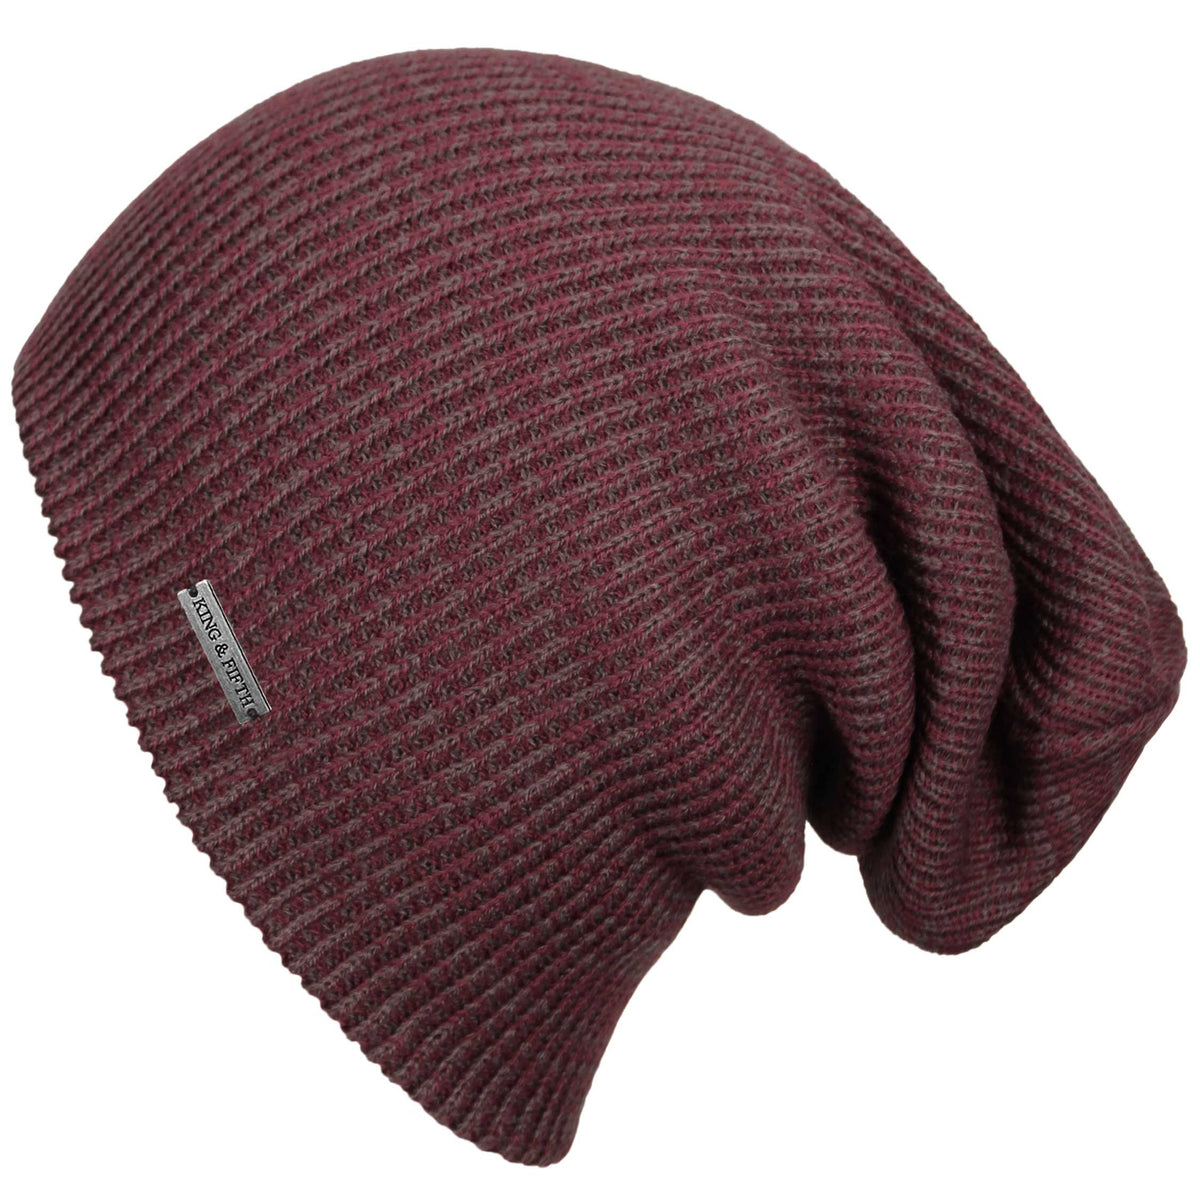 K&F King and Fifth - Forte XL Supply - Beanie Mens Slouchy Large Extra Hat Beanie Mens - The